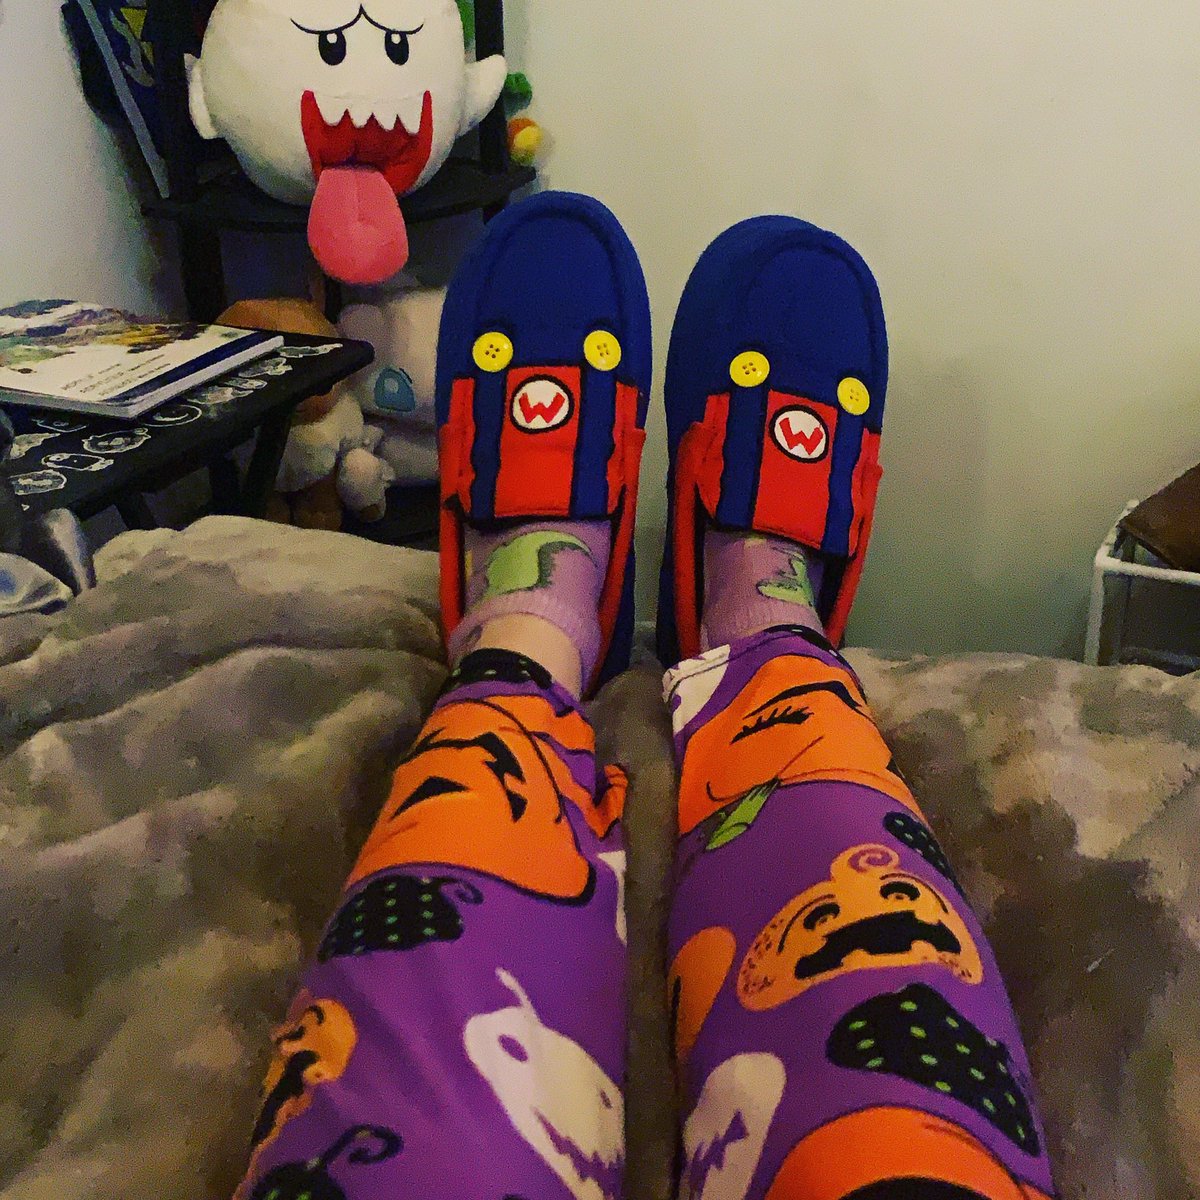 Sewed new buttons on my slippers! They fell off awhile back :3
Lookin’ fresh meow 👌💜

#nattend0 #nintendonat #nintendo #marioslippers #nintendoslippers #supermariobros #supermario #cozyvibes #cozyliving